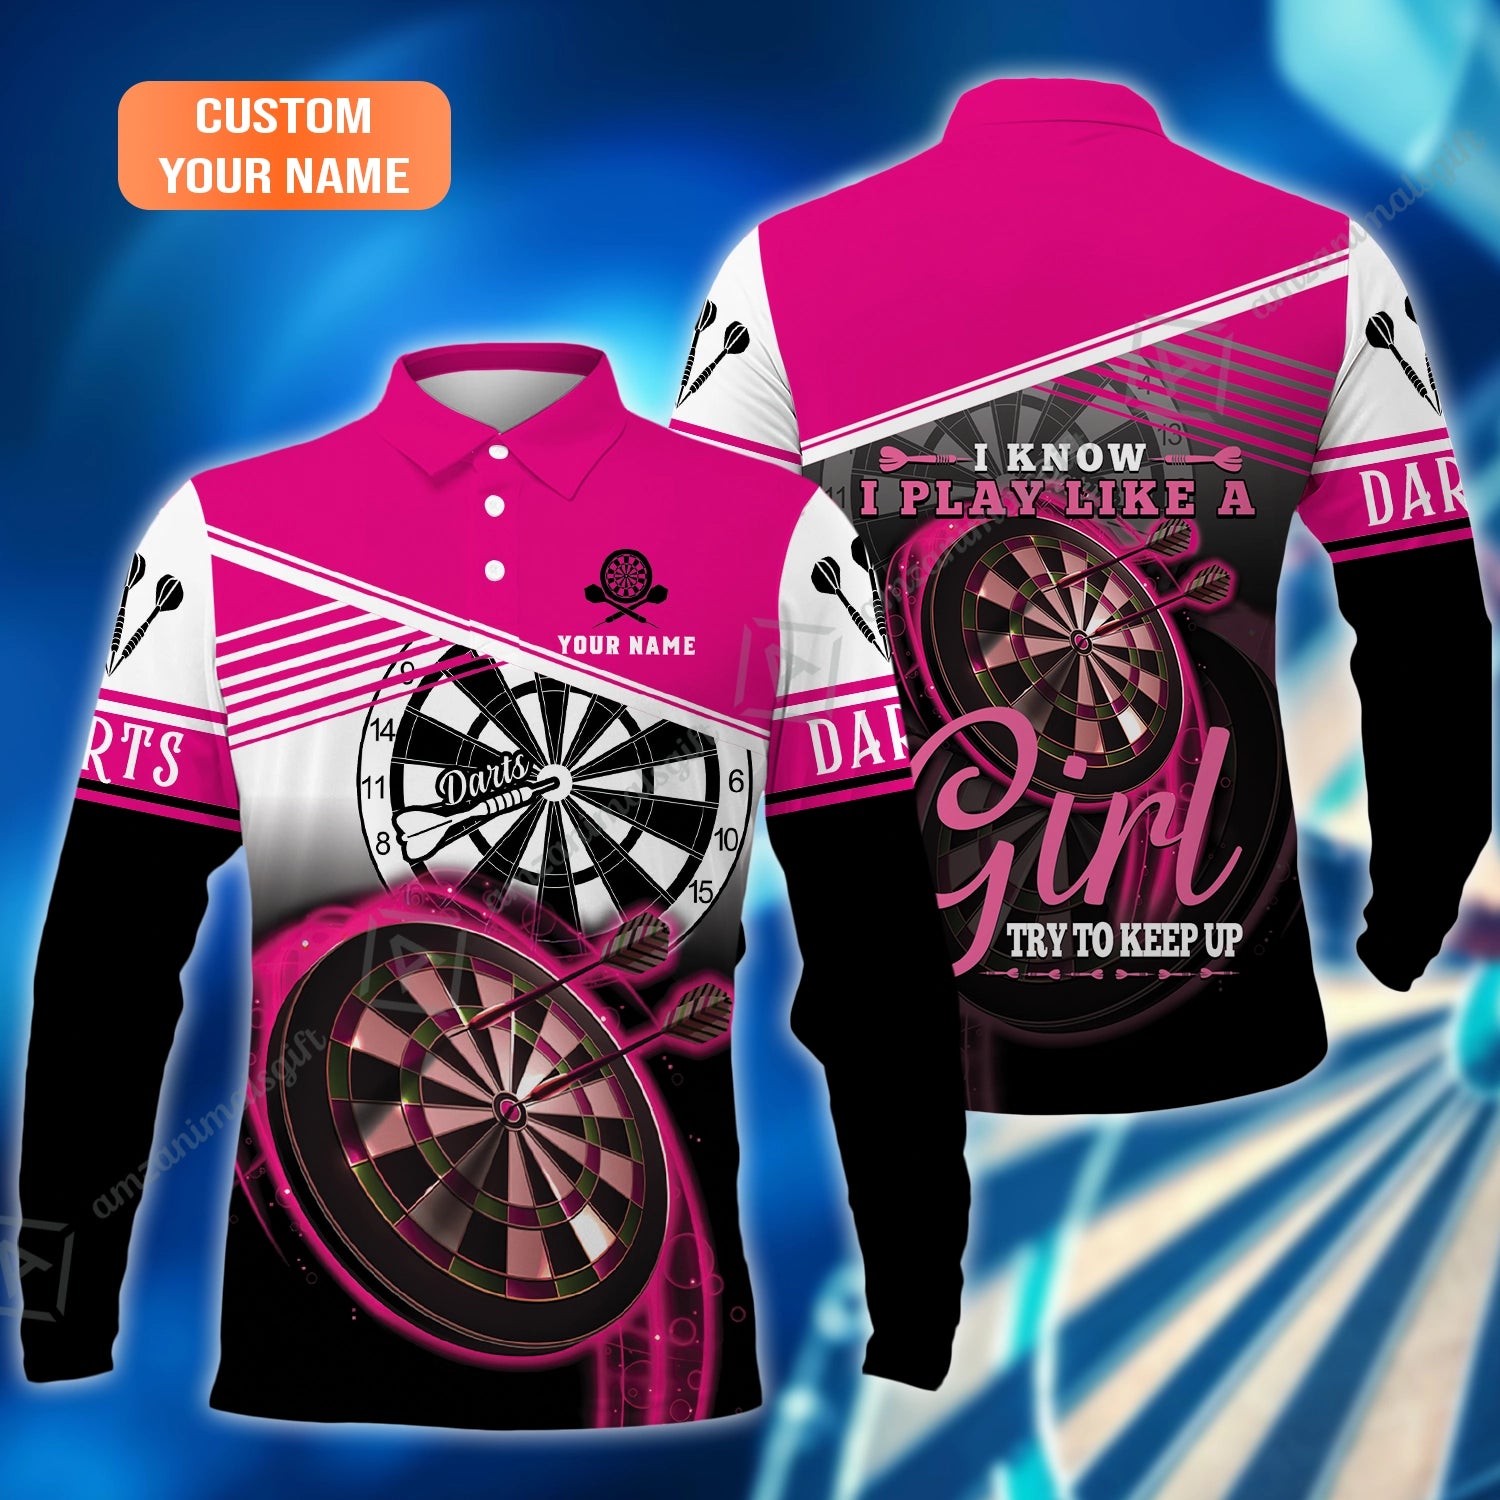 Personalized Darts Long Polo Shirt, Darts Pink Color Shirt I Know I Play Like A Girl Try To Keep Up, Outfits For Darts Players, Darts Team